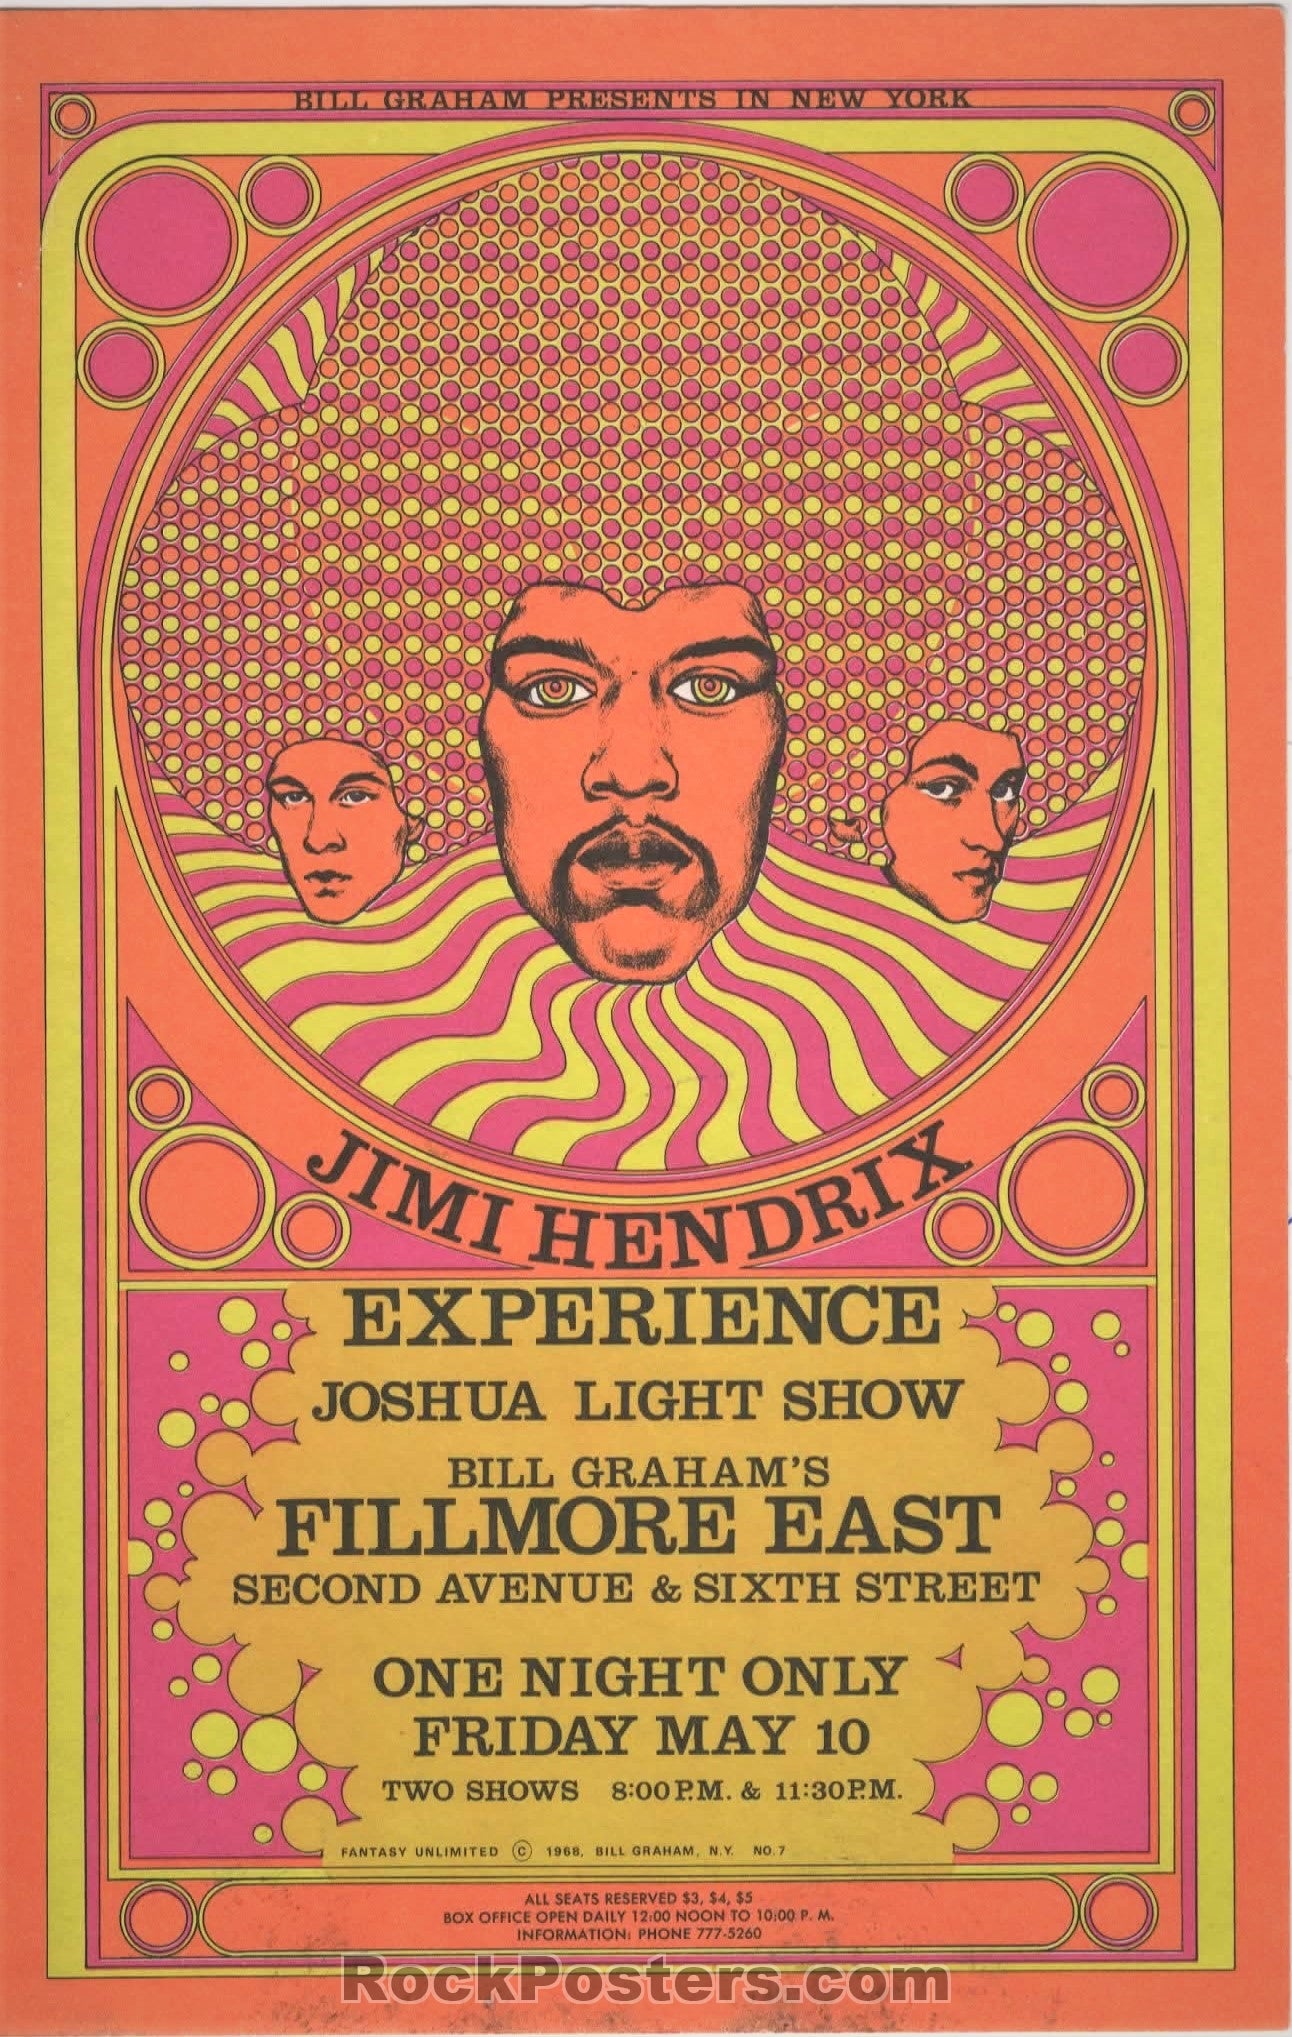 AUCTION - AOR 2.90 - Jimi Hendrix - Fillmore East 1968 NYC Postcard - Excellent